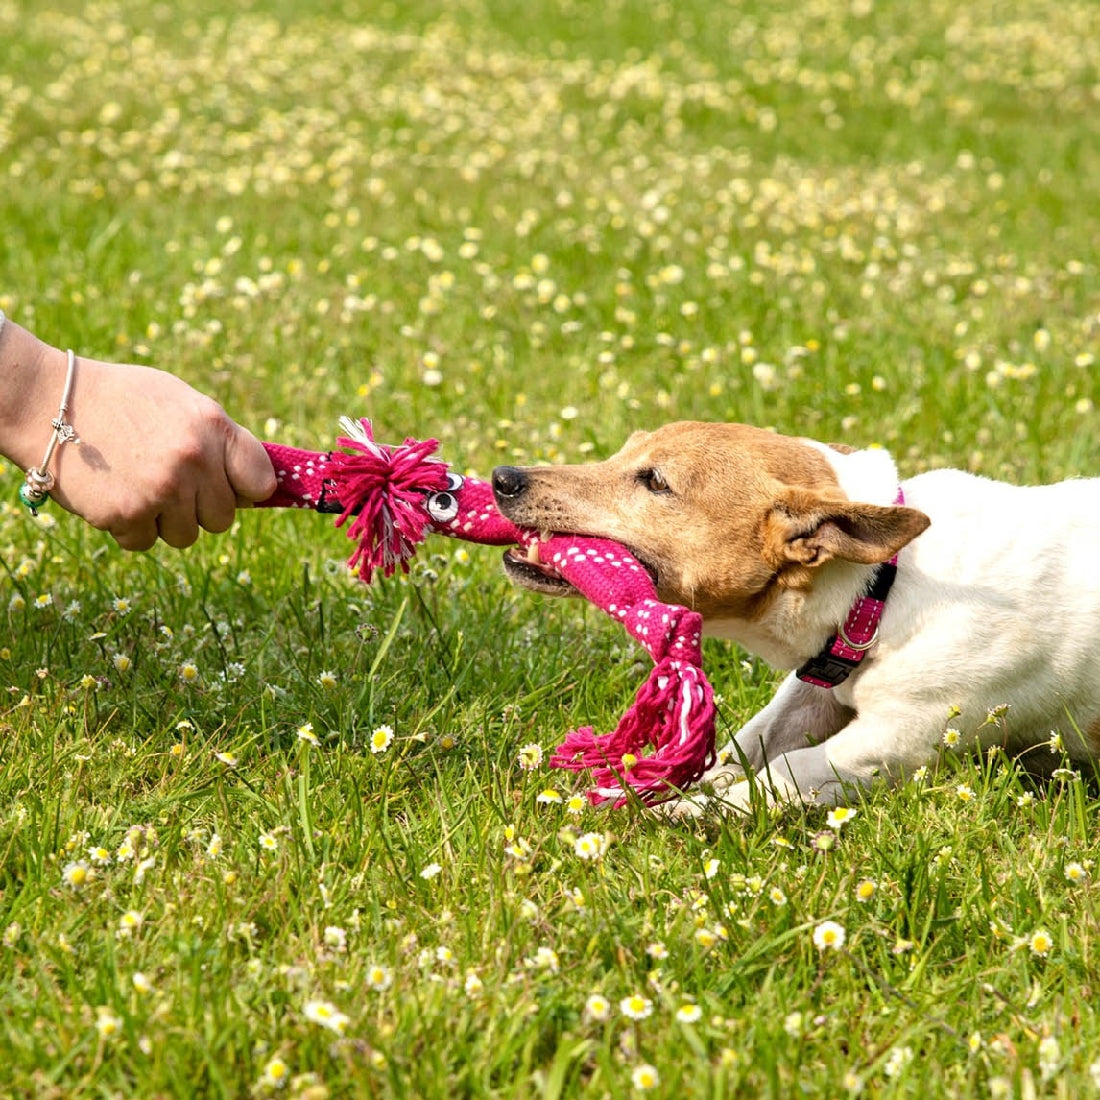 Dog playing with a pink Rogz toy on grass.